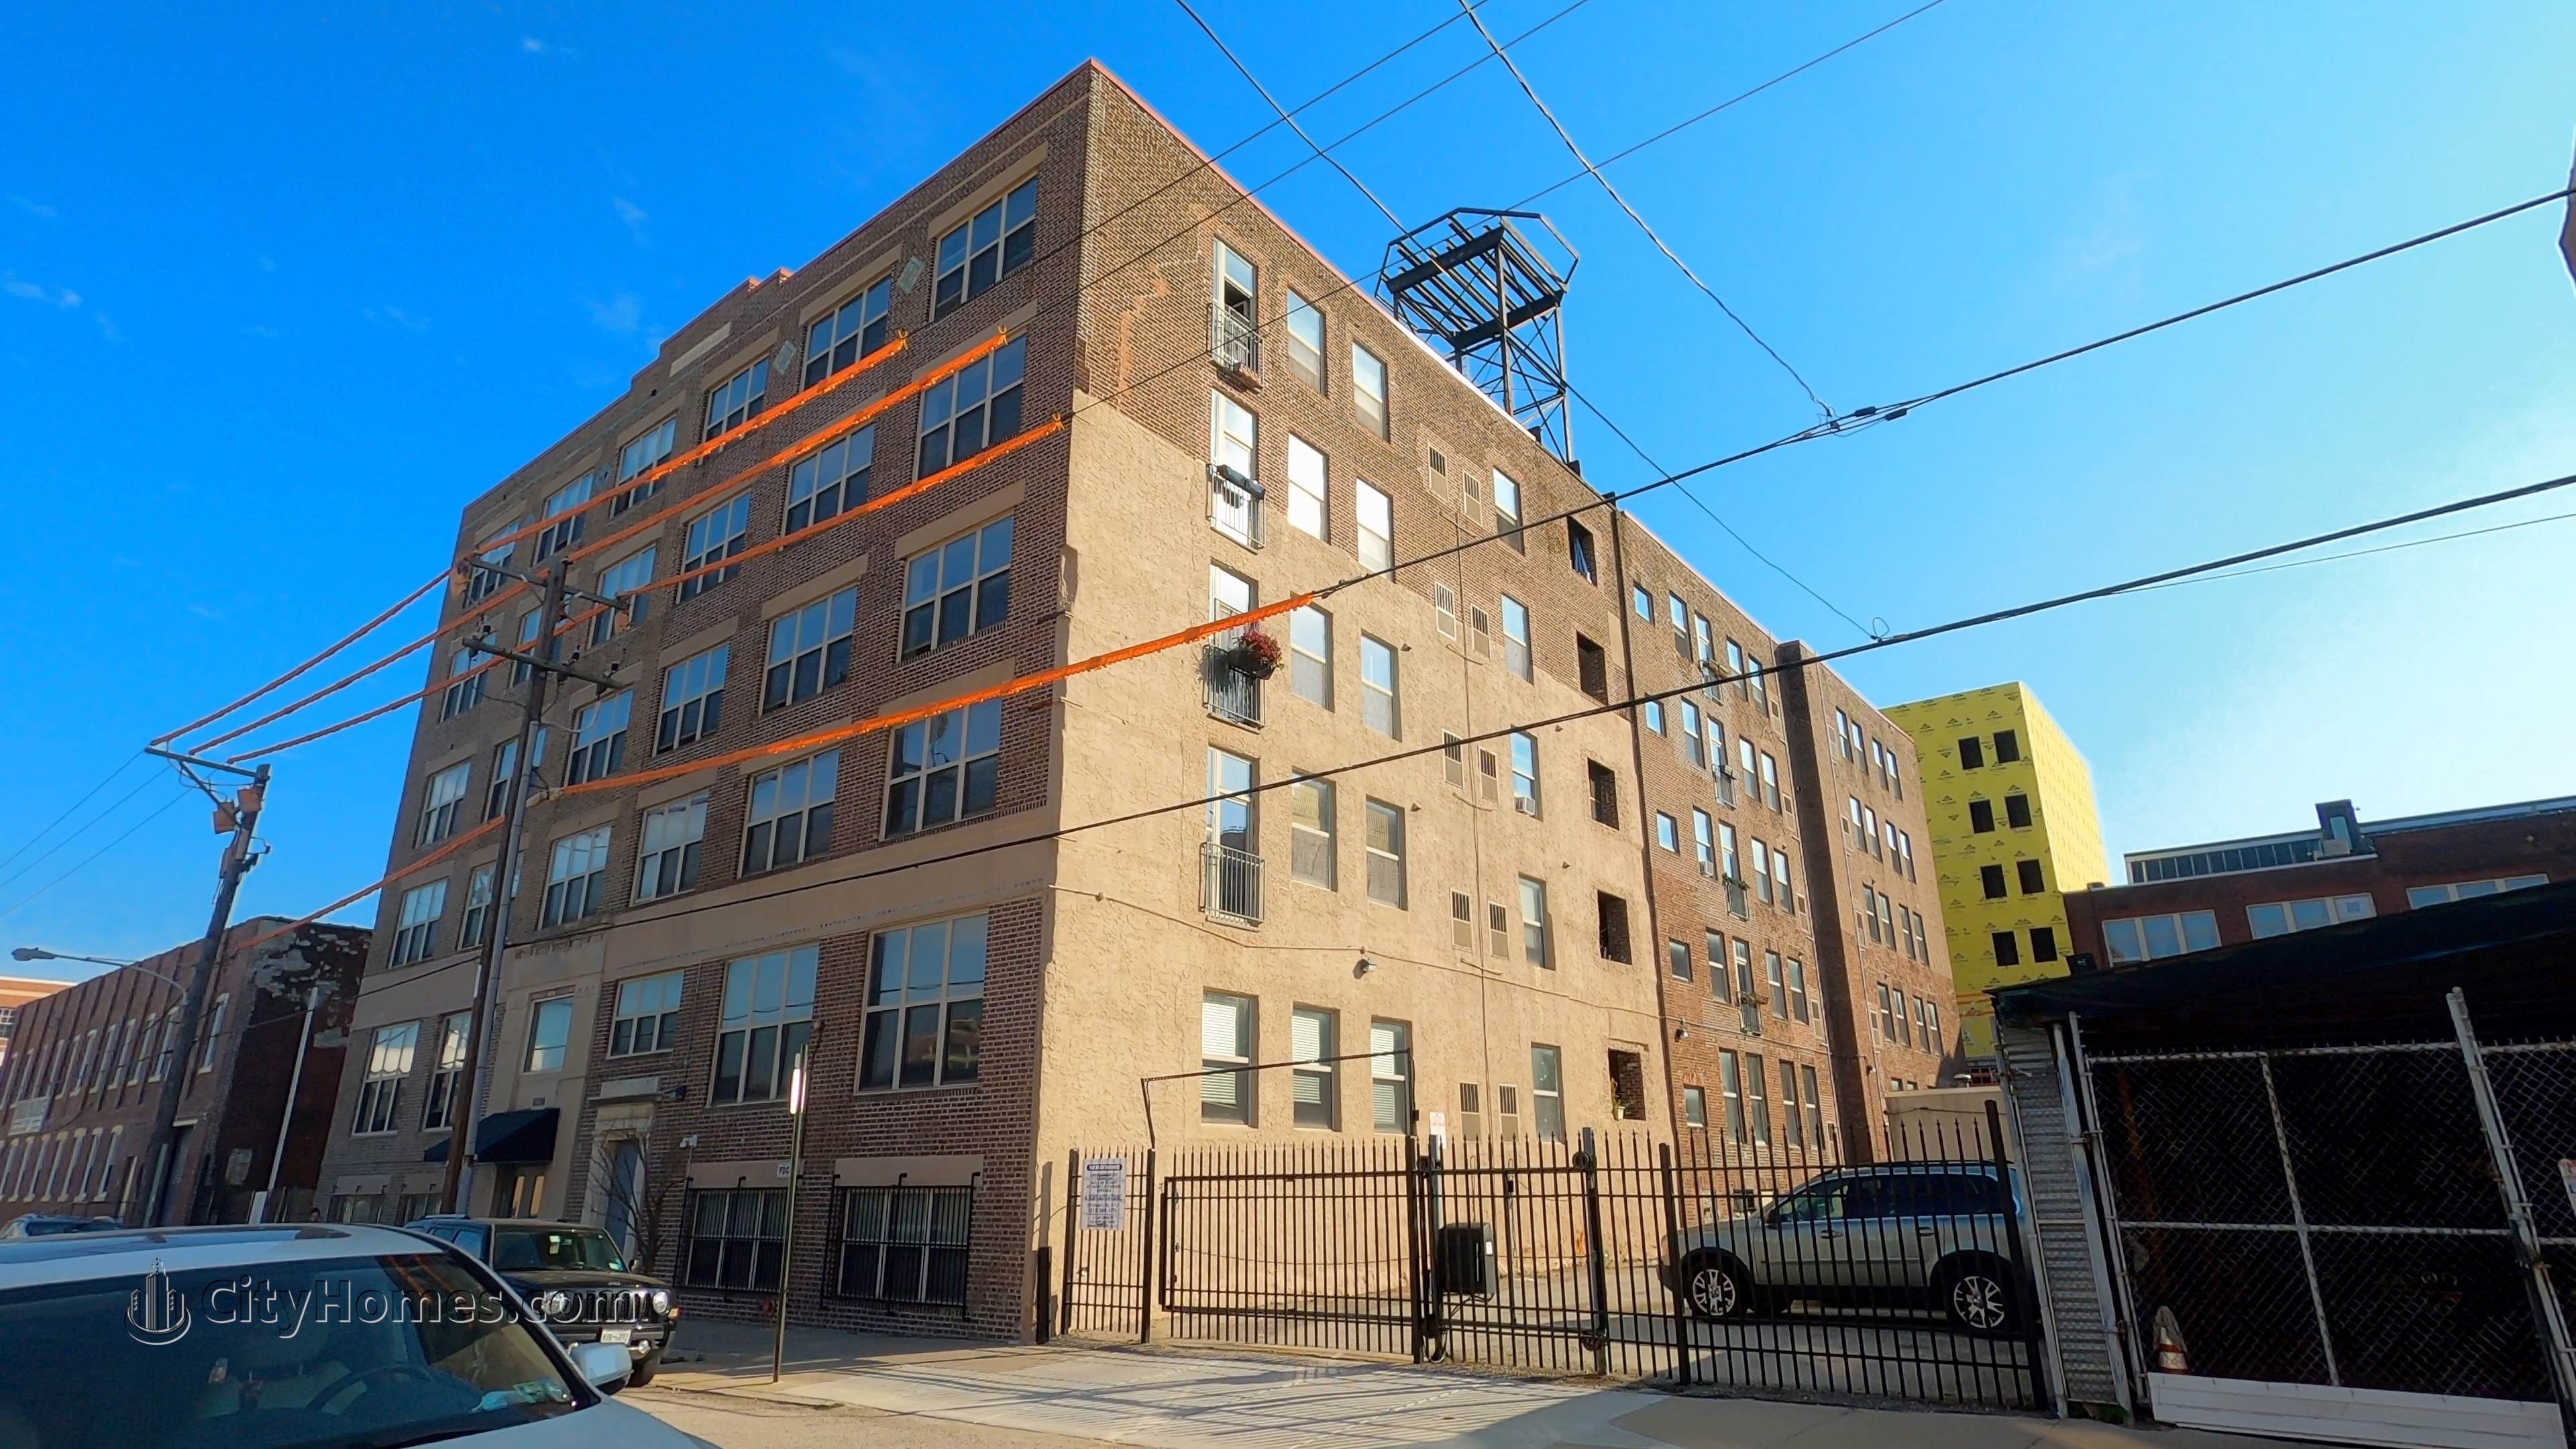 4. 1220 Buttonwood Lofts building at 1210-26 Buttonwood St, Callowhill, Philadelphia, PA 19123